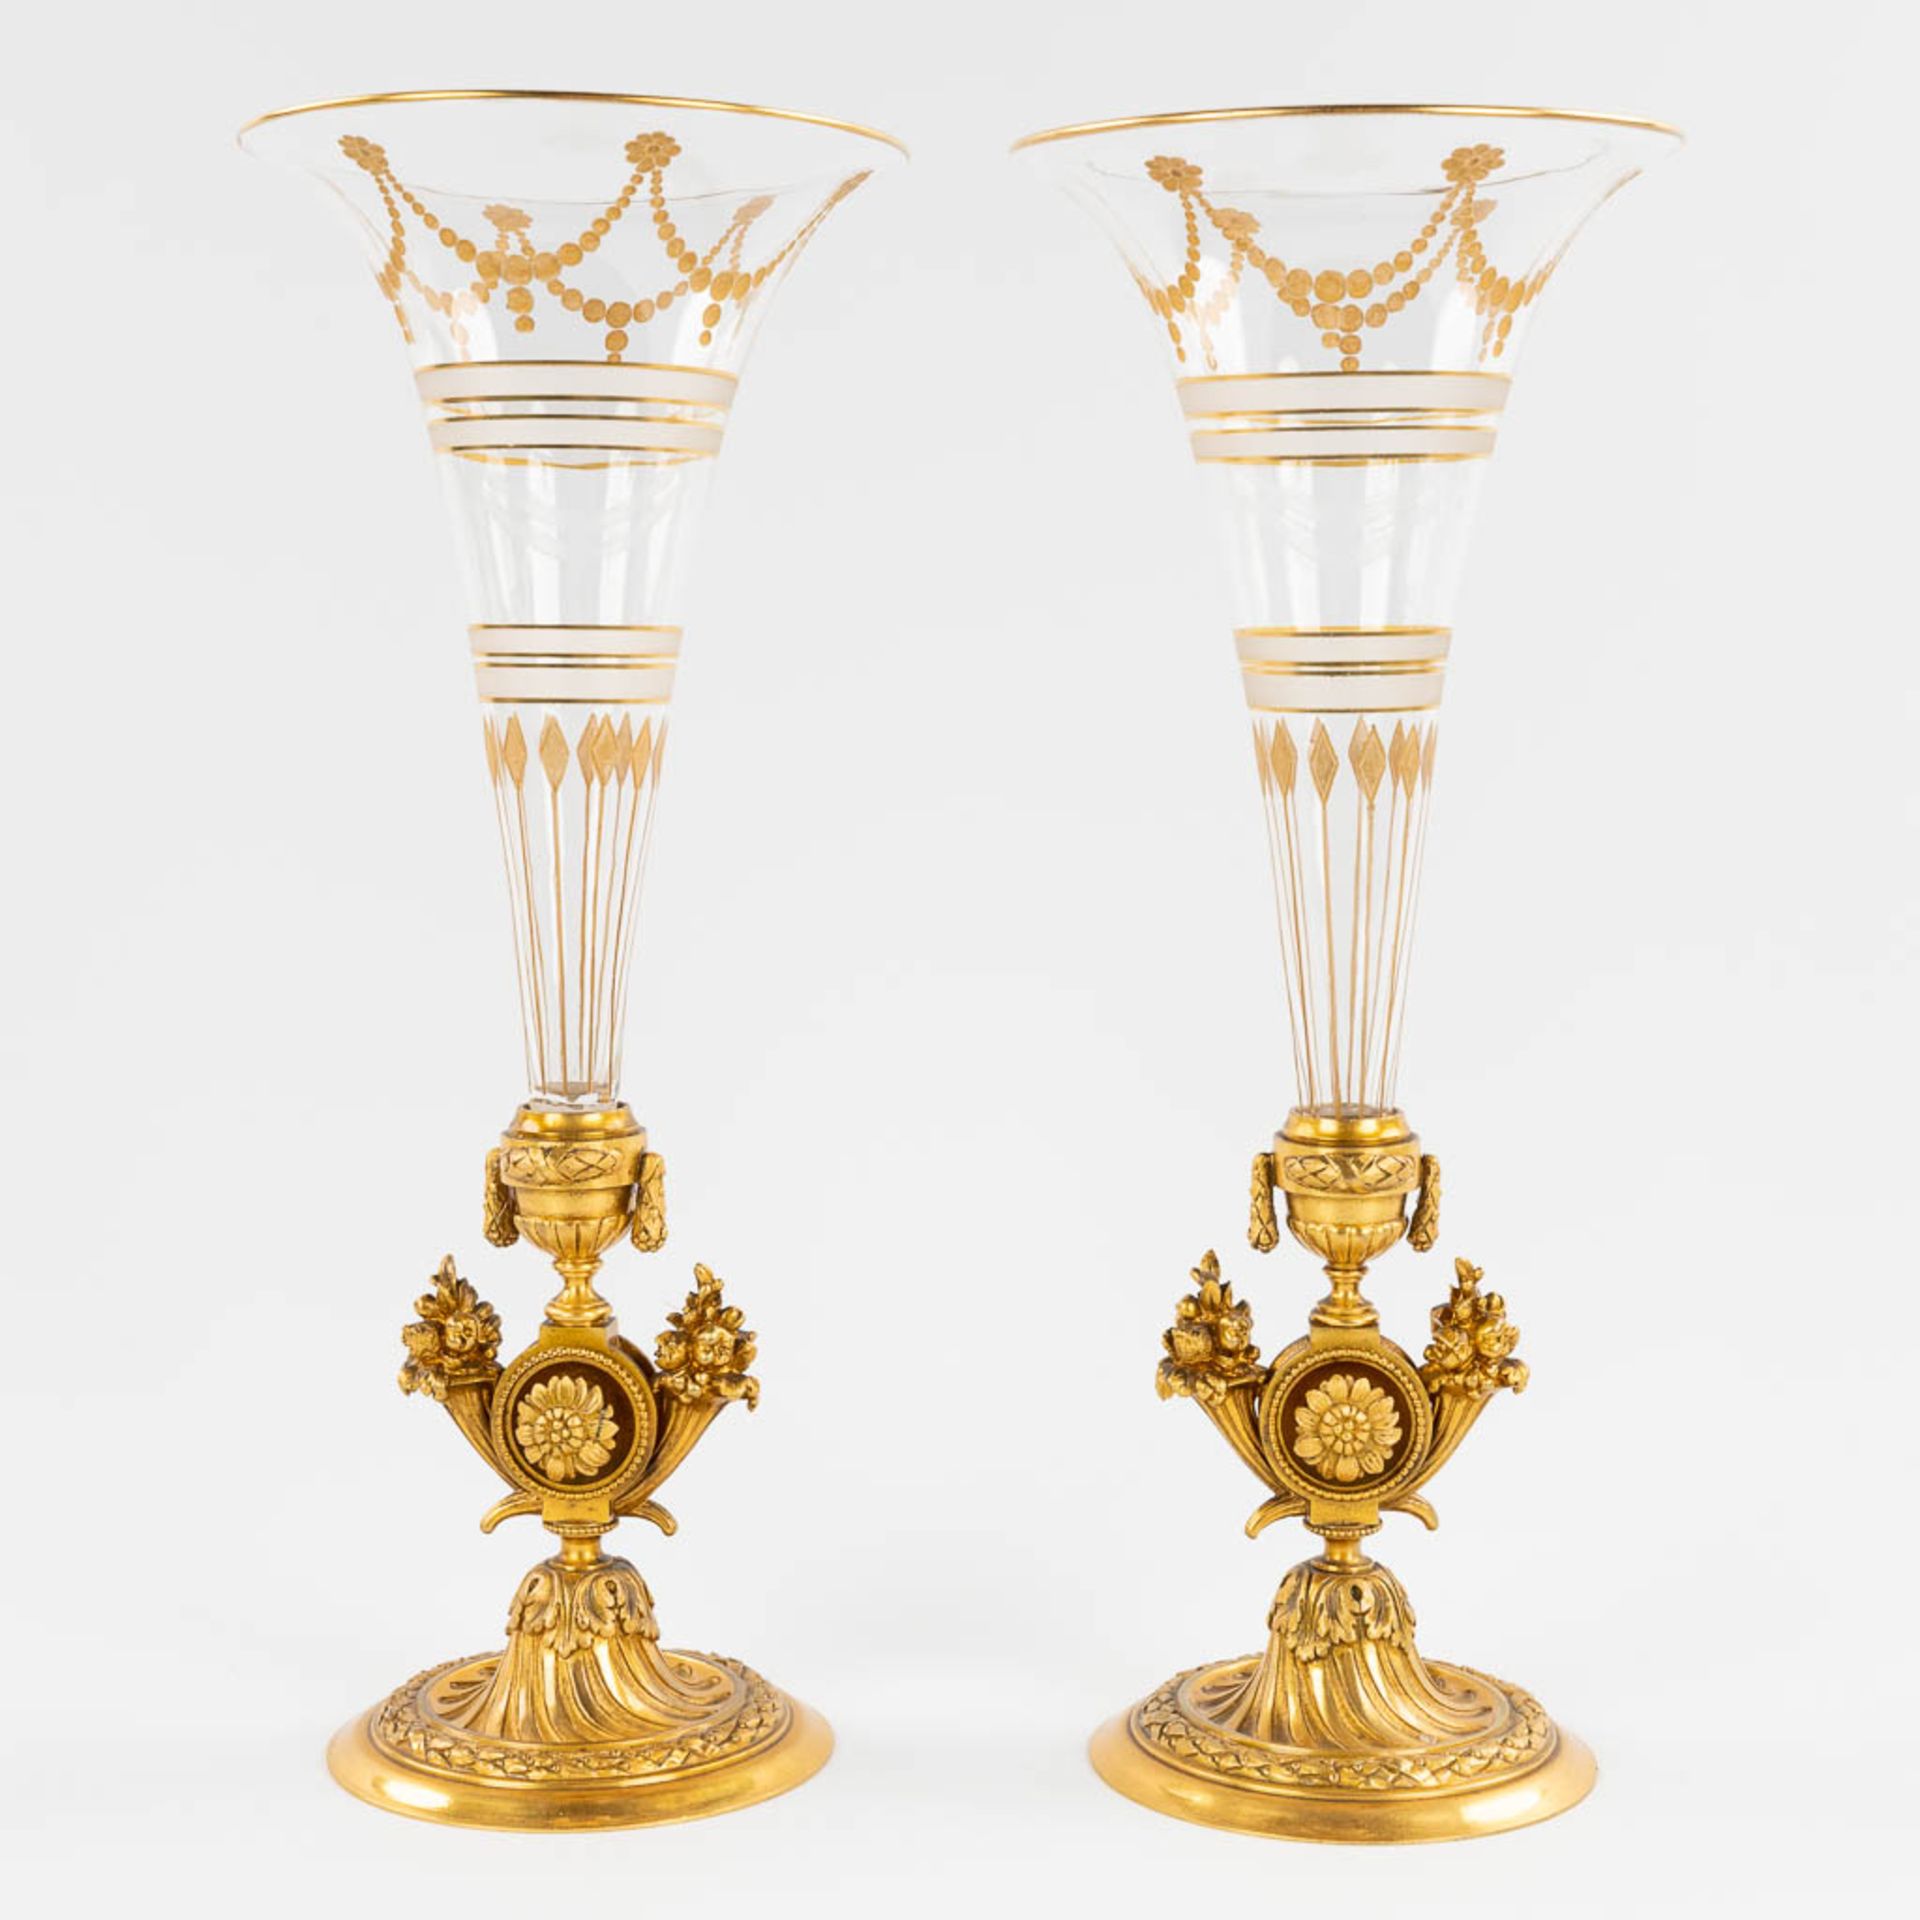 A pair of trumpet vases, gilt bronze and glass in Louis XVI style. 19th C. (H:31,5 x D:13 cm) - Image 4 of 13